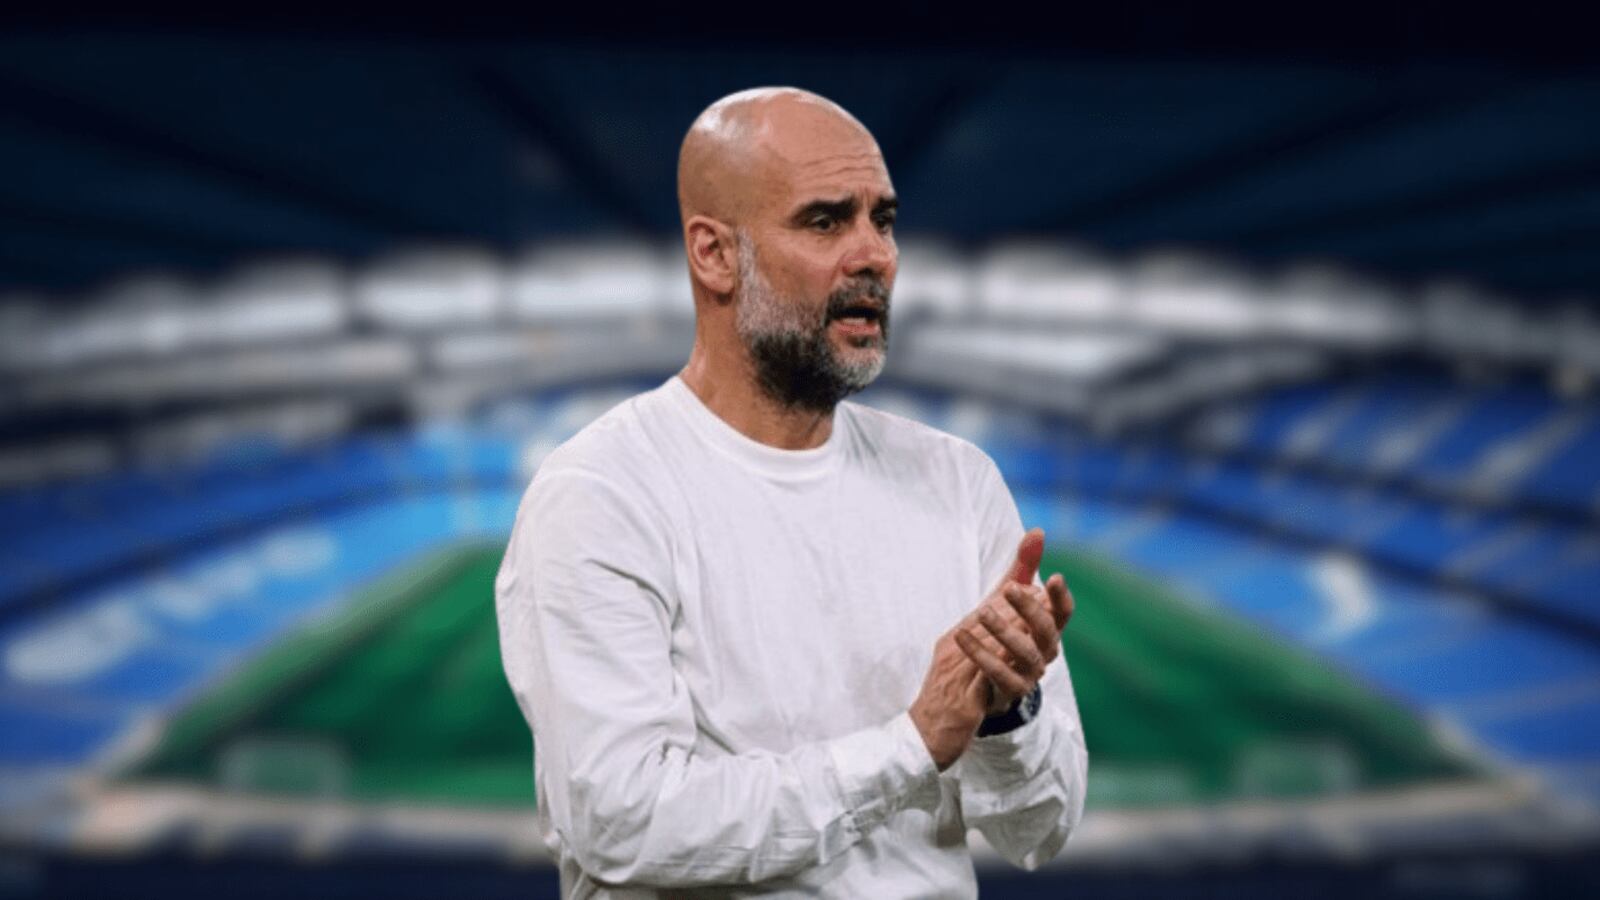 To win Premier League, Pep Guardiola demands this player valued at 60 million euros